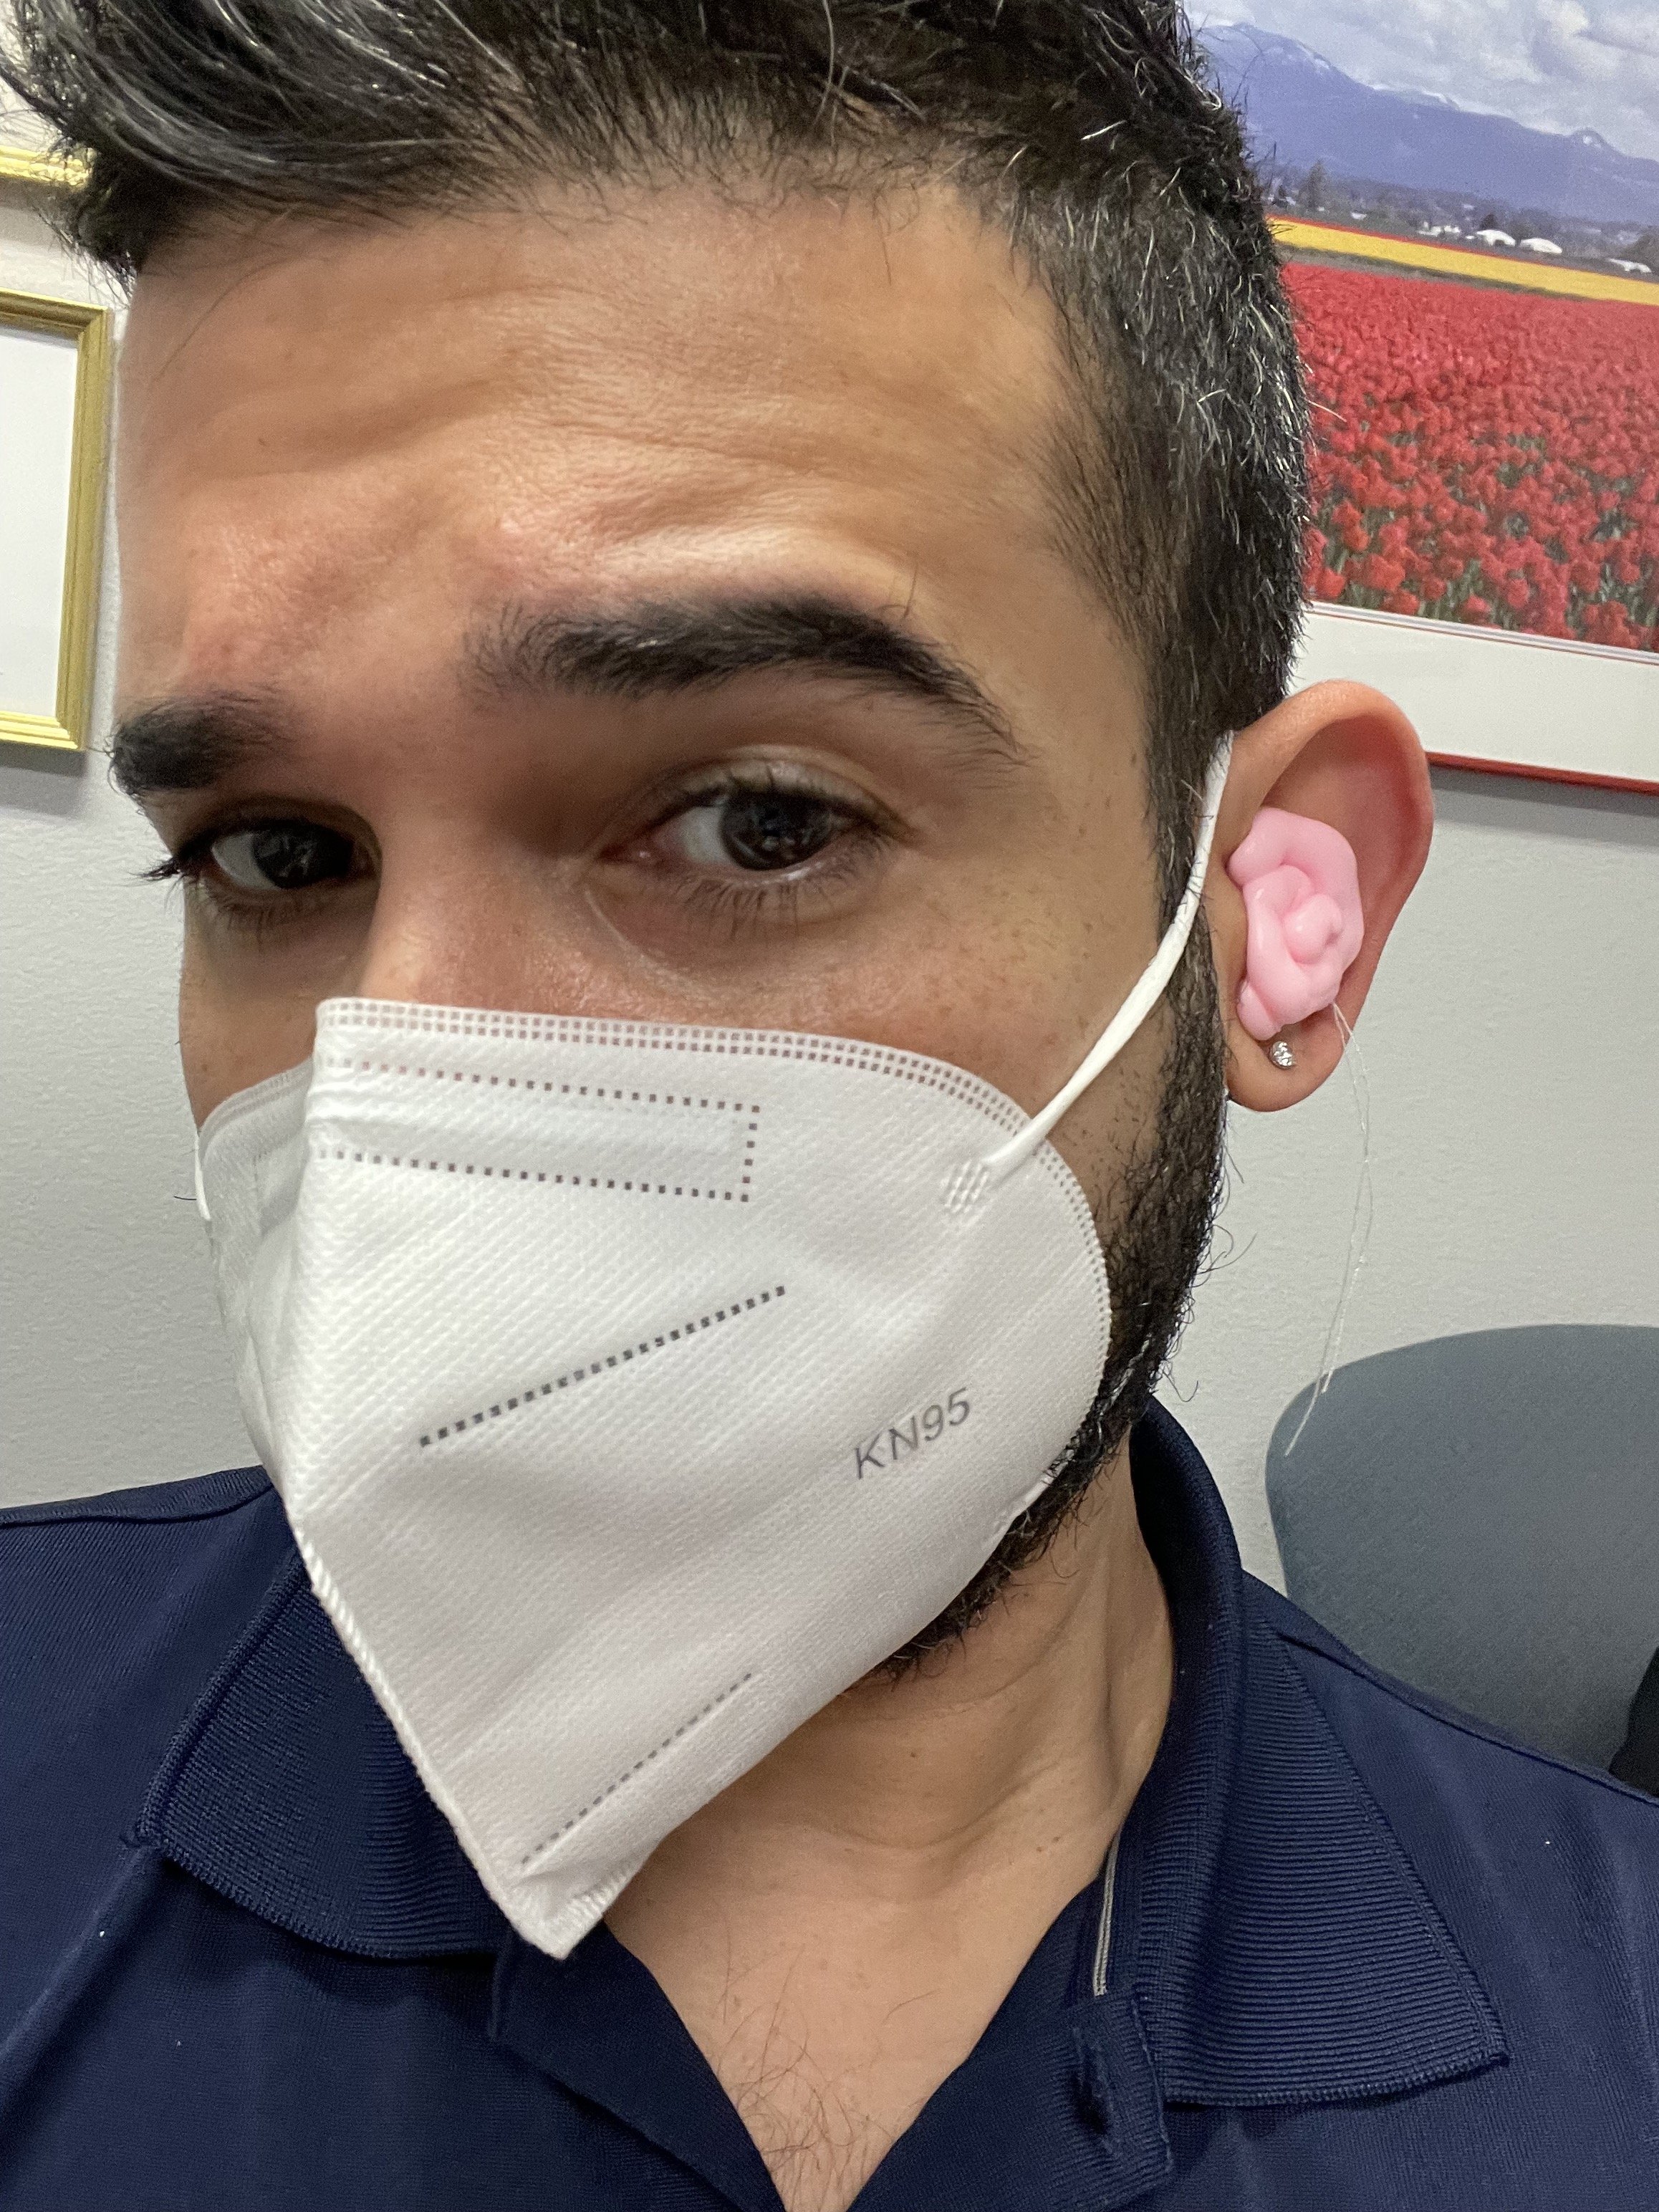  Javier at the audiologist getting molds made for a new pair of hearing aids, during the mid stages of the pandemic. They support streaming music via his phone’s Bluetooth capabilities. 